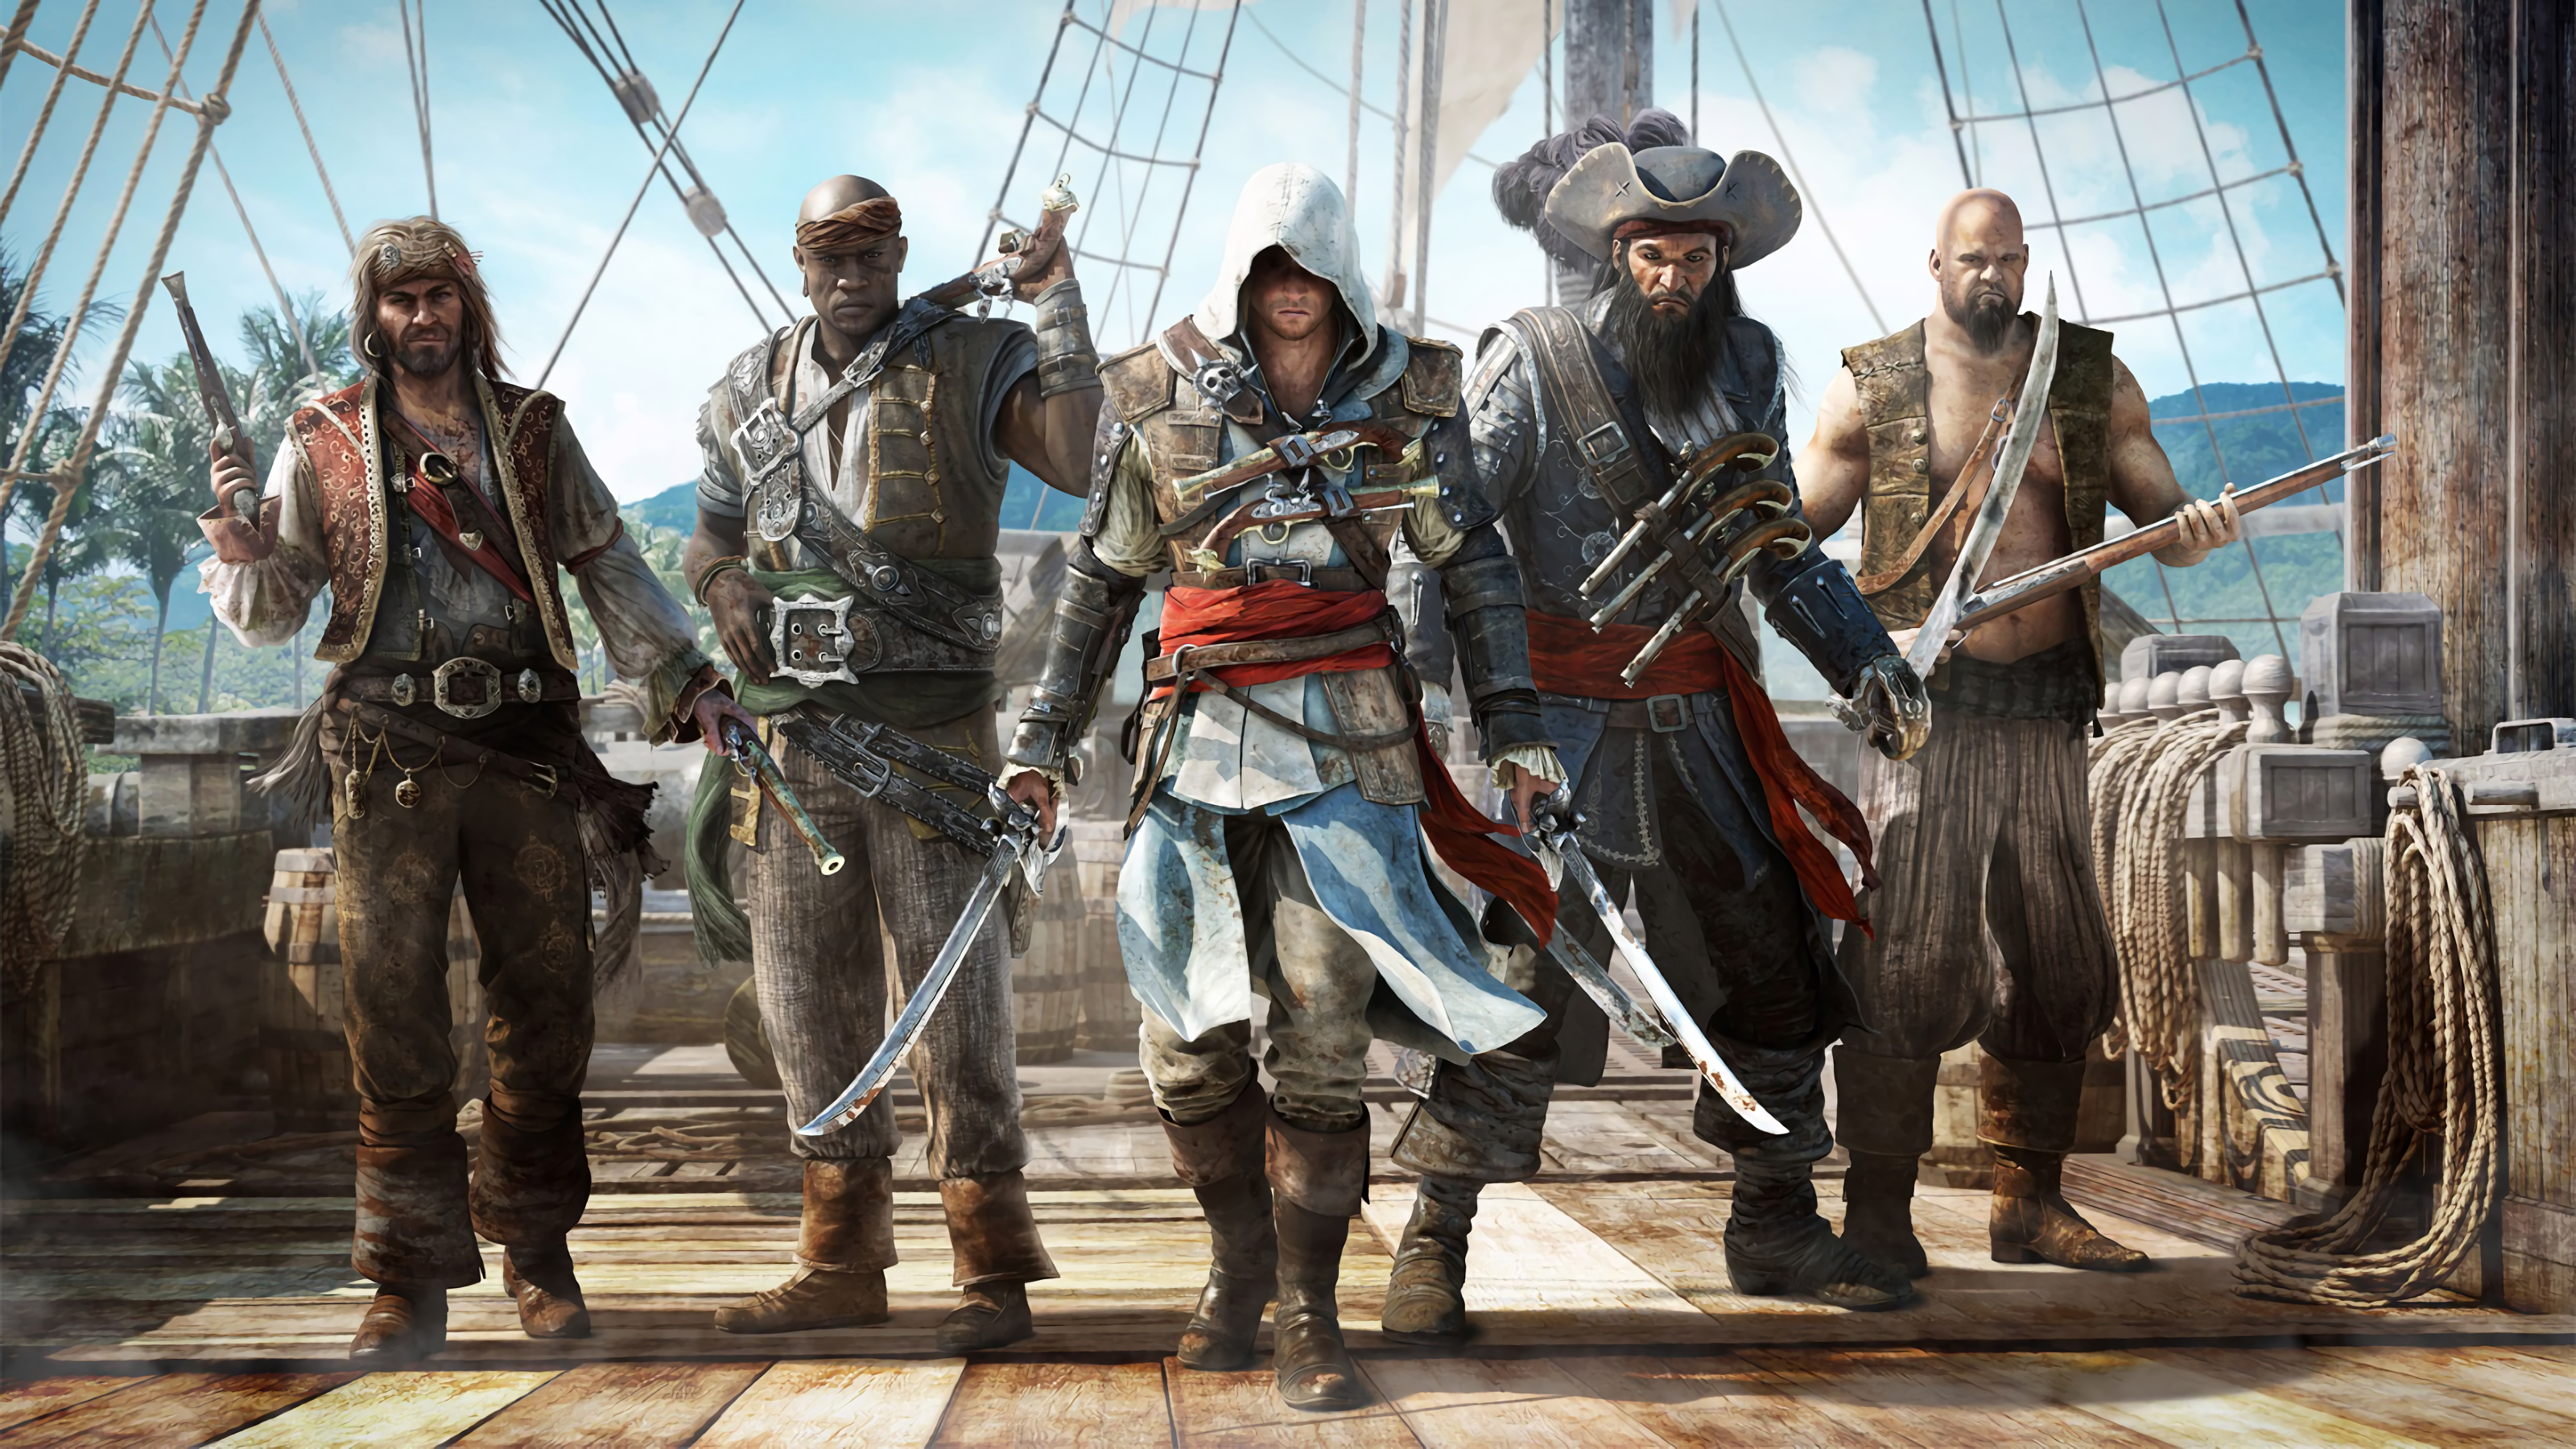 General 3200x1800 video games video game art Assassin's Creed Assassin's Creed: Black Flag PC gaming video game characters video game men